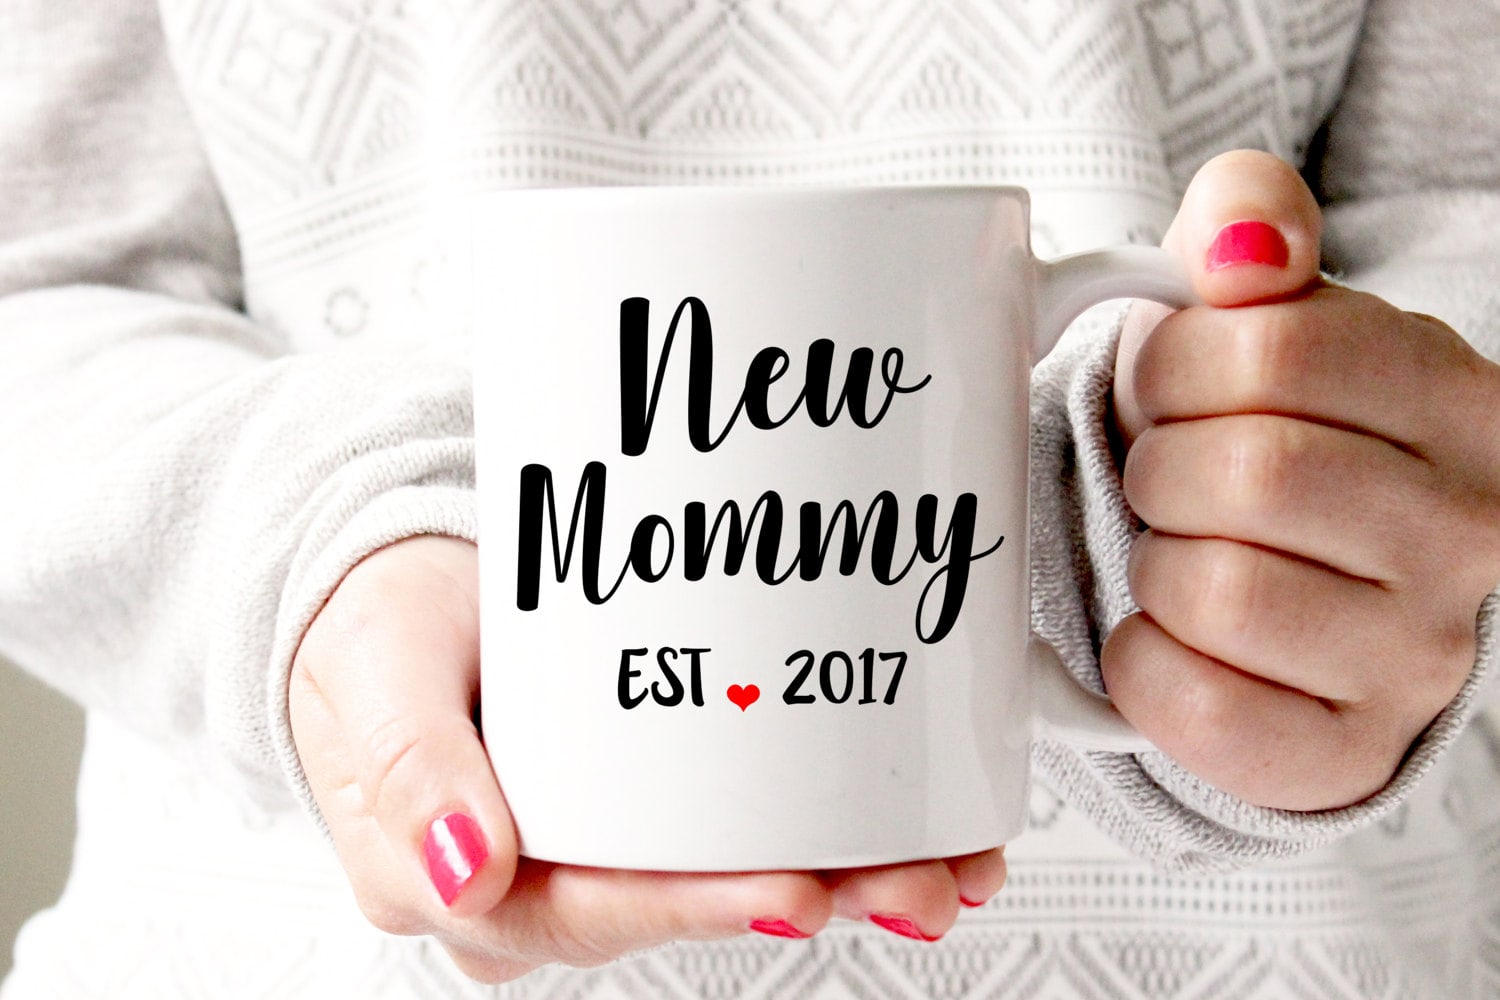 Sentimental New Mom Gifts From Dad Ideas for After Baby’s Birth - Elfster Blog